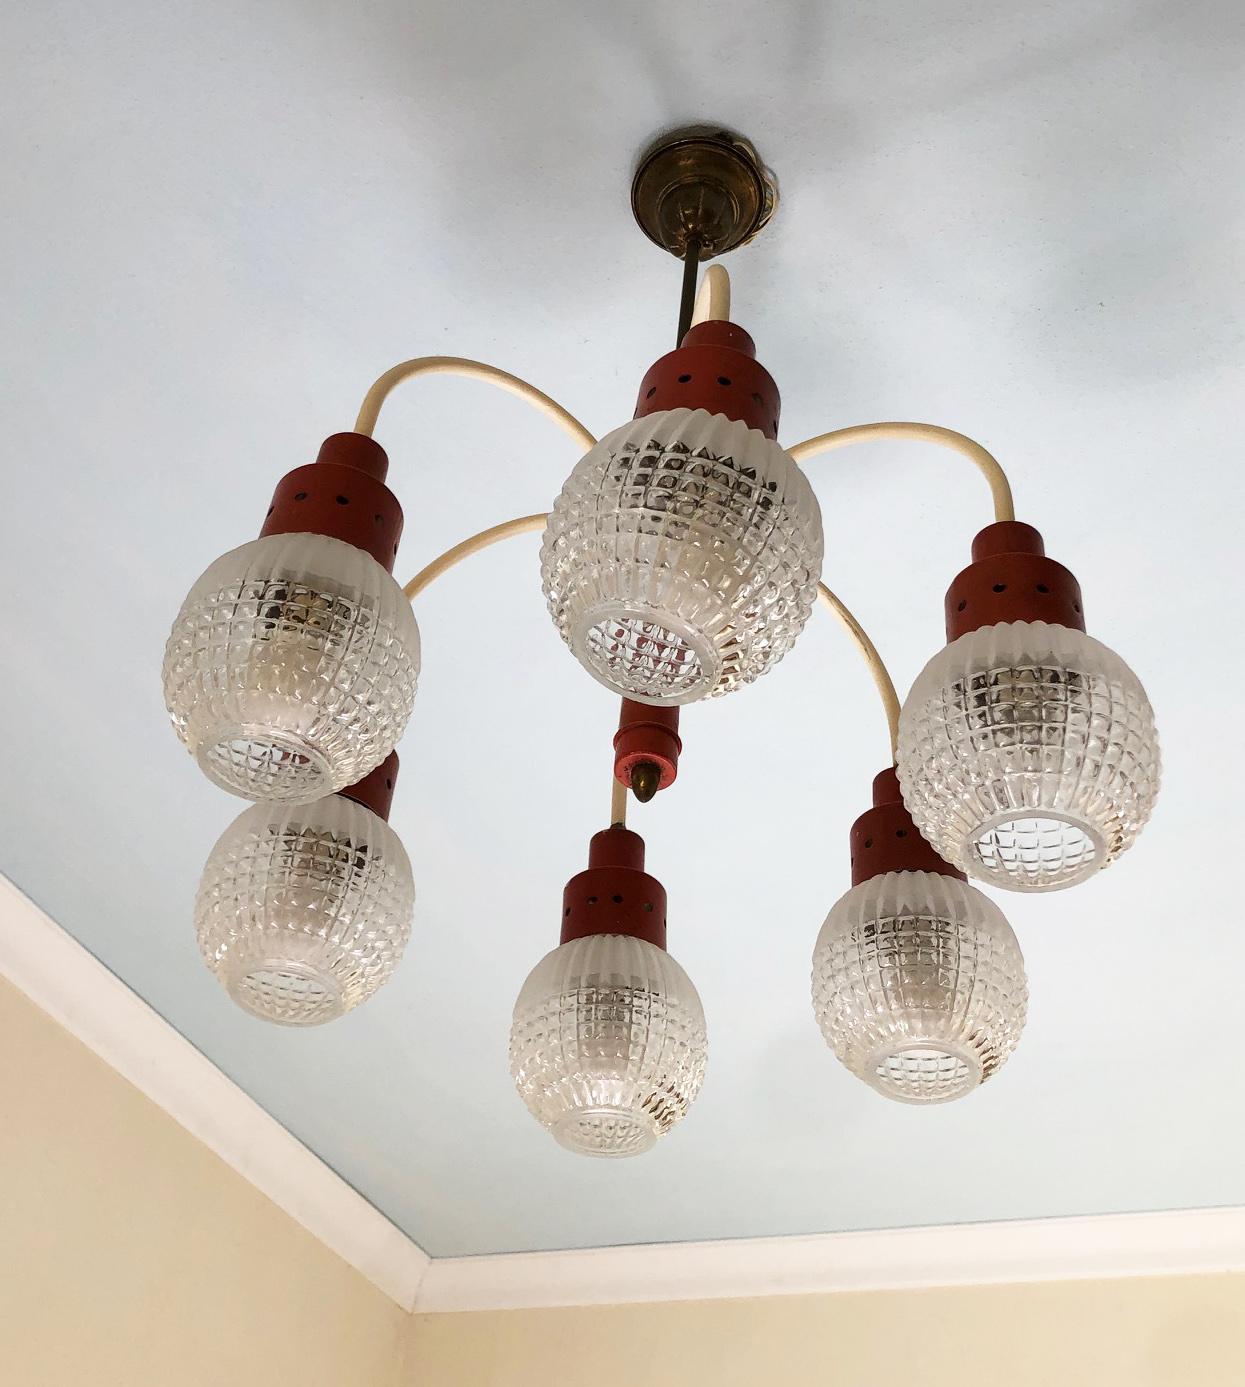 Original Italian Chandelier from 1970s with Six Lights, Orange and Cream Color In Good Condition For Sale In Buggiano, IT